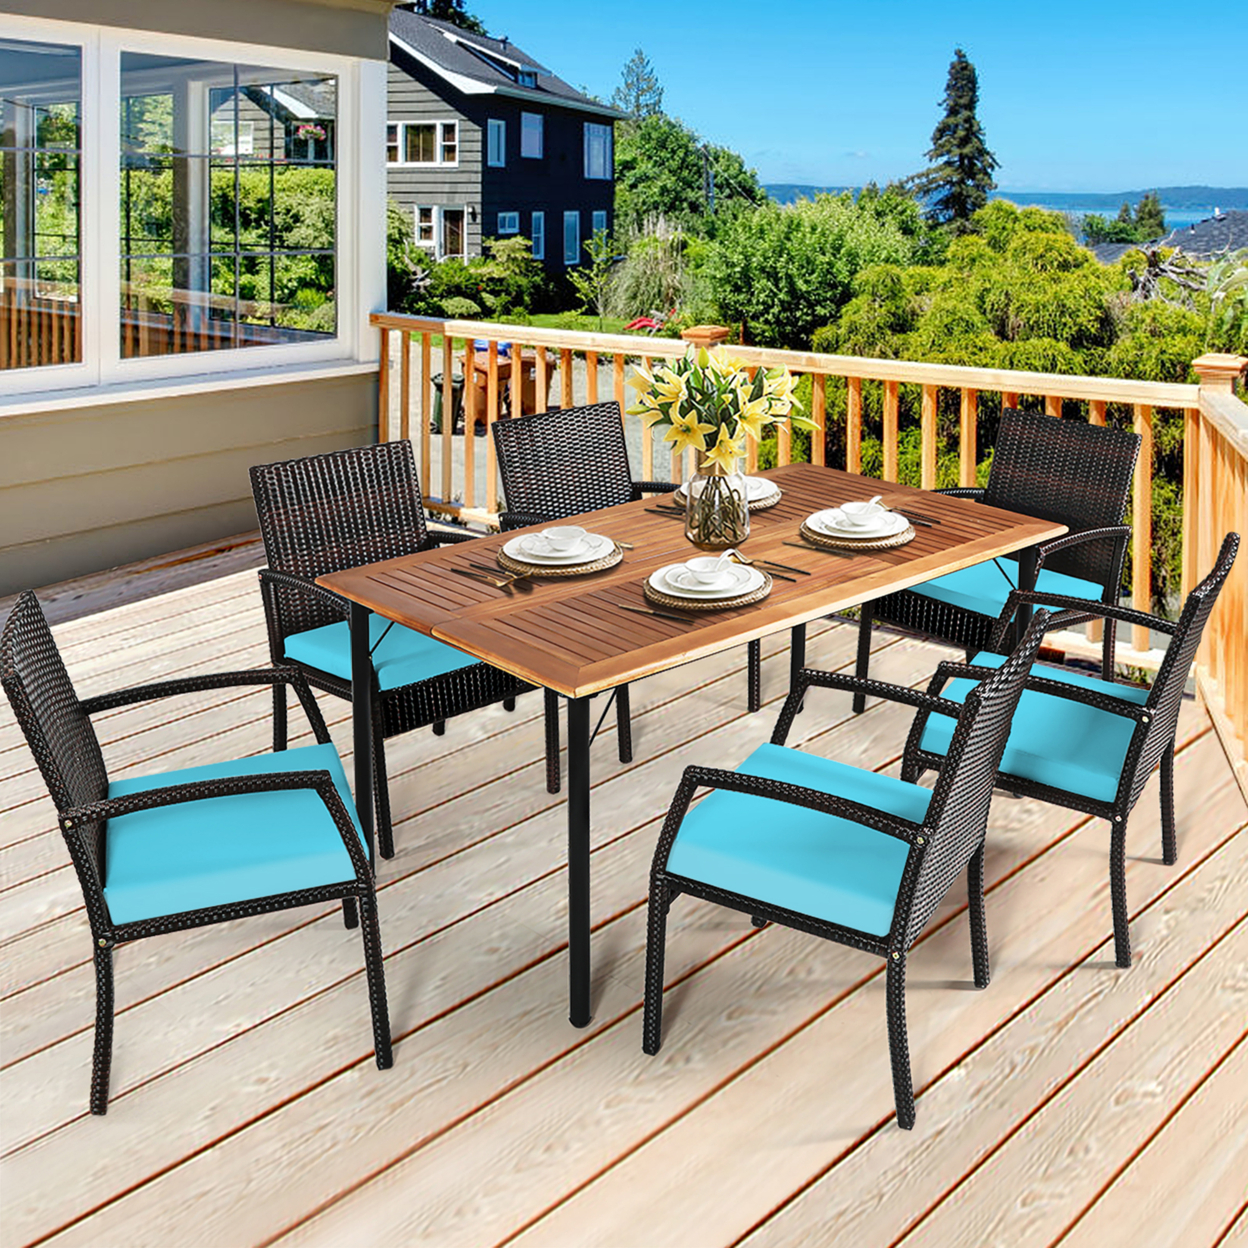 7PCS Patio Dining Furniture Set Yard W/ Wooden Tabletop Turquoise Cushions